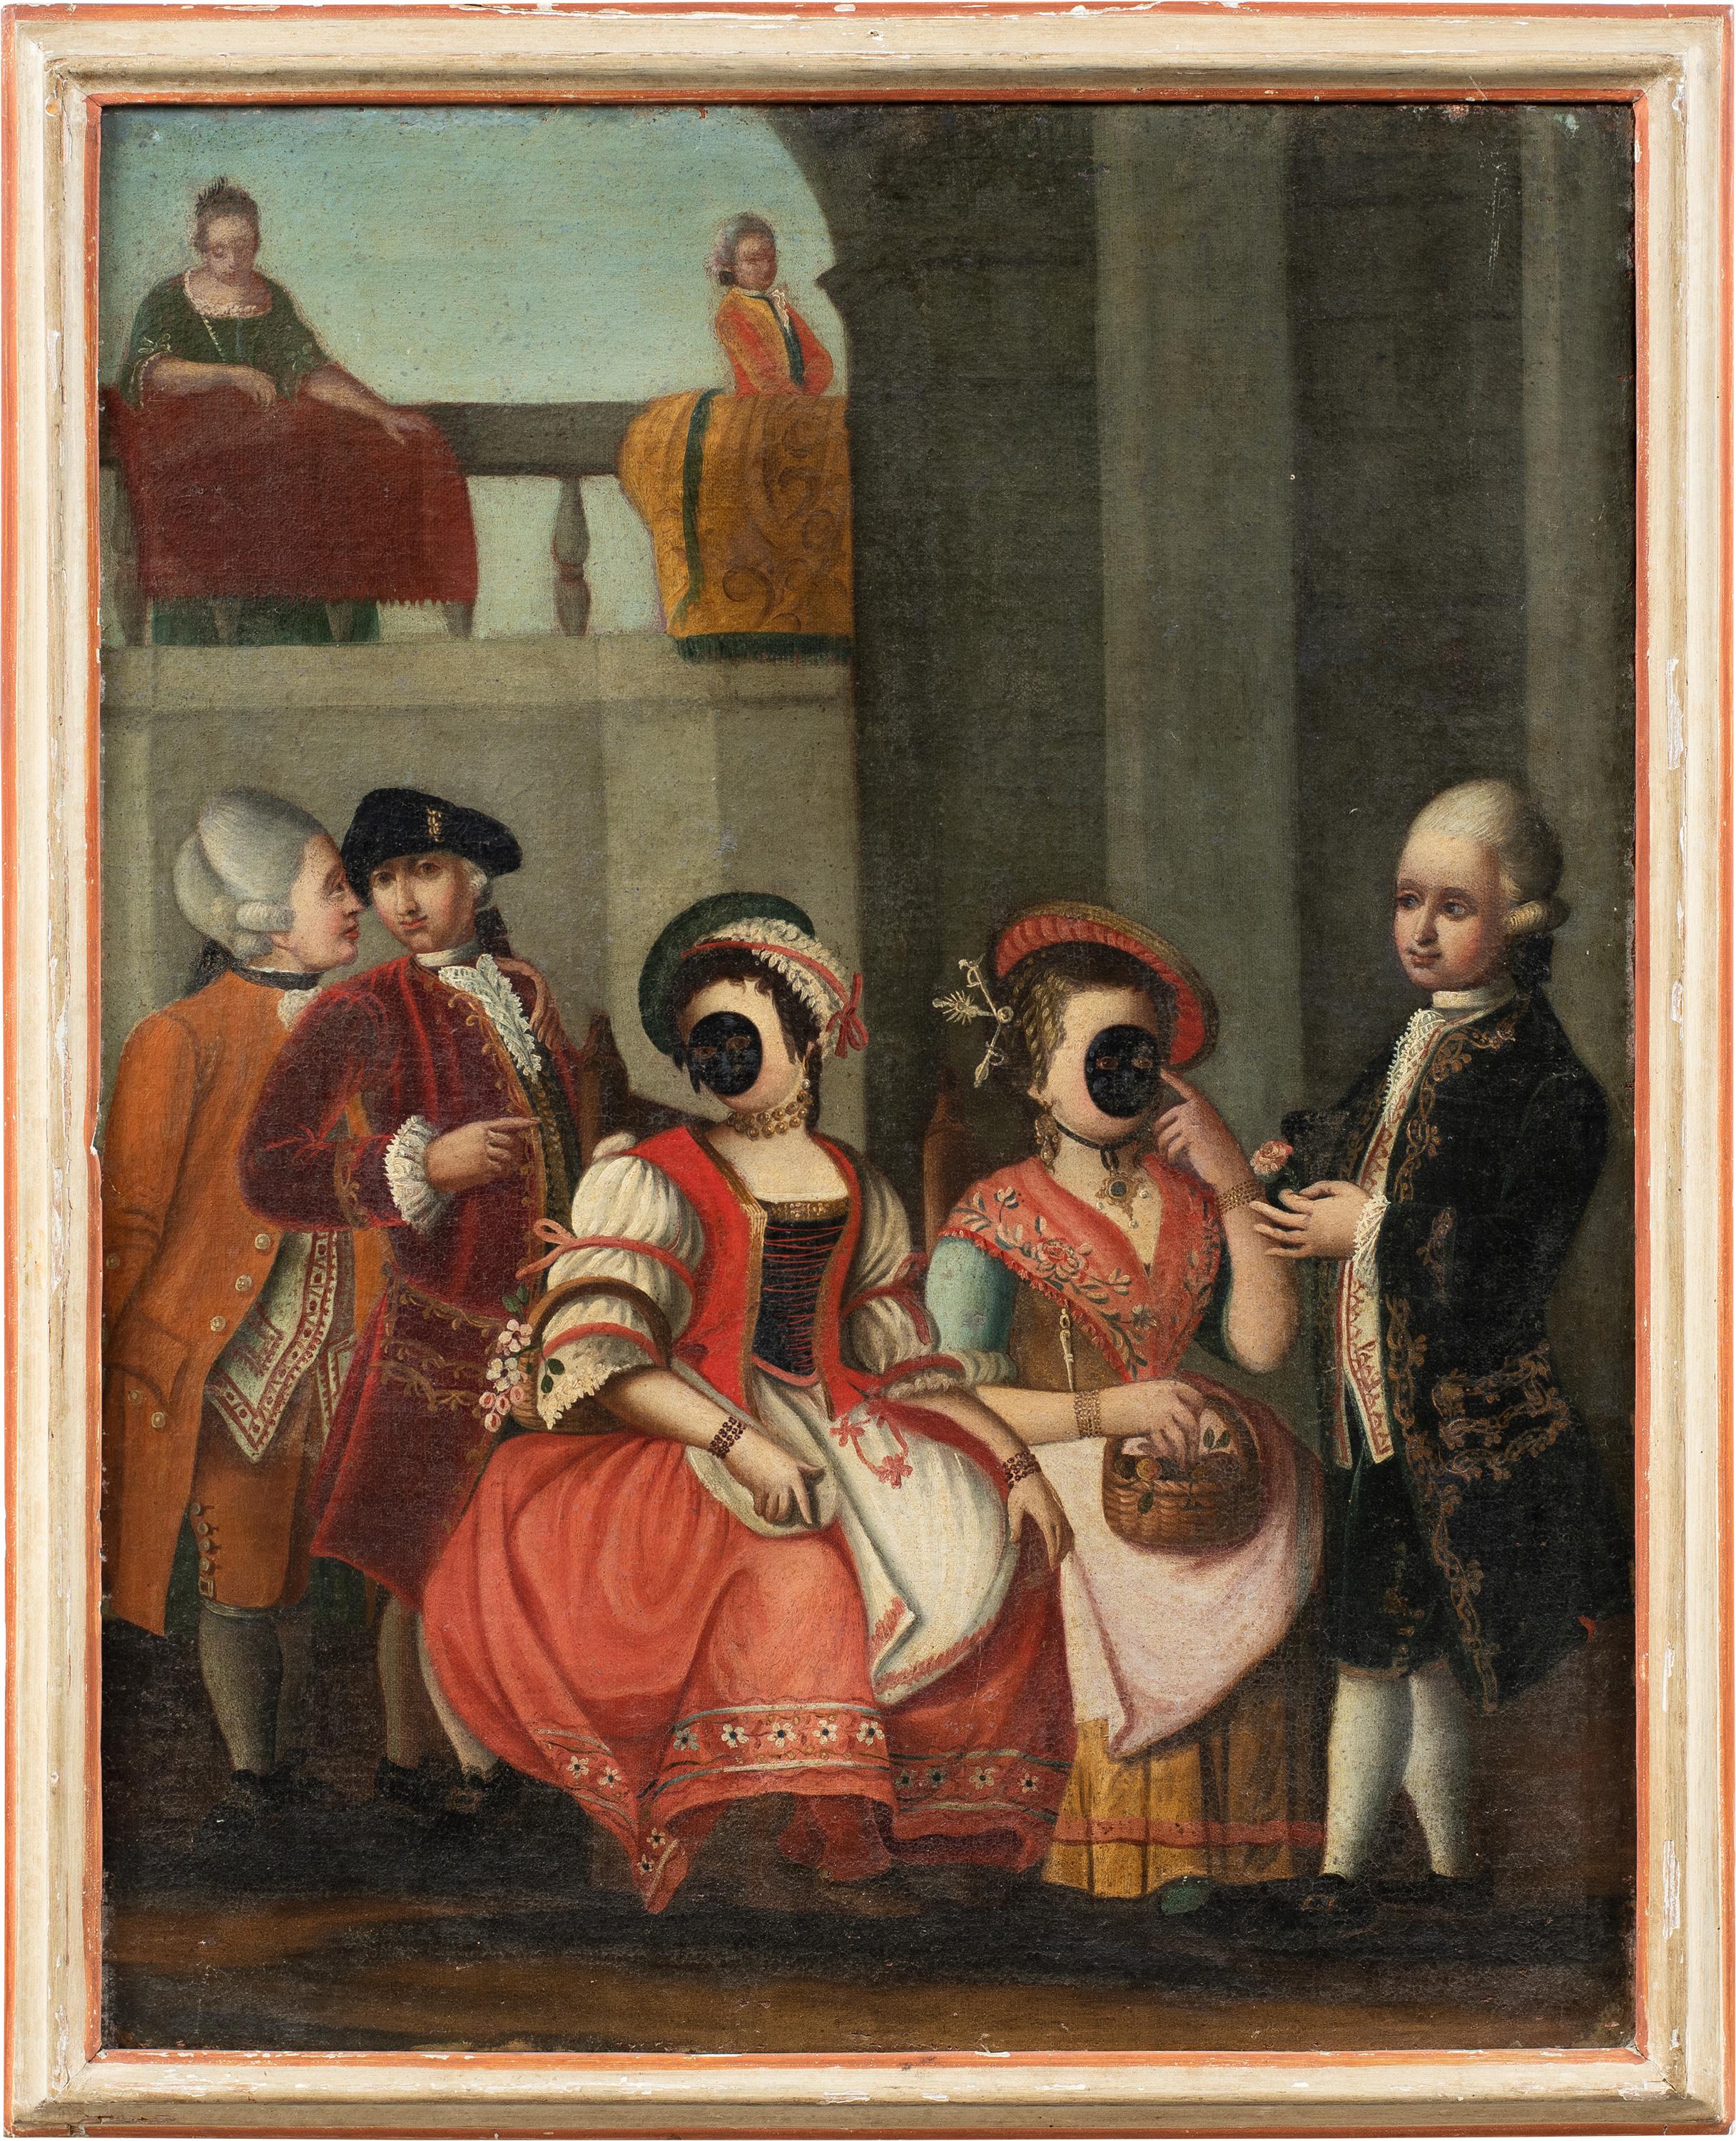 Unknown Figurative Painting - Rococò Venetian master - 18th century figure painting - Masked figurines